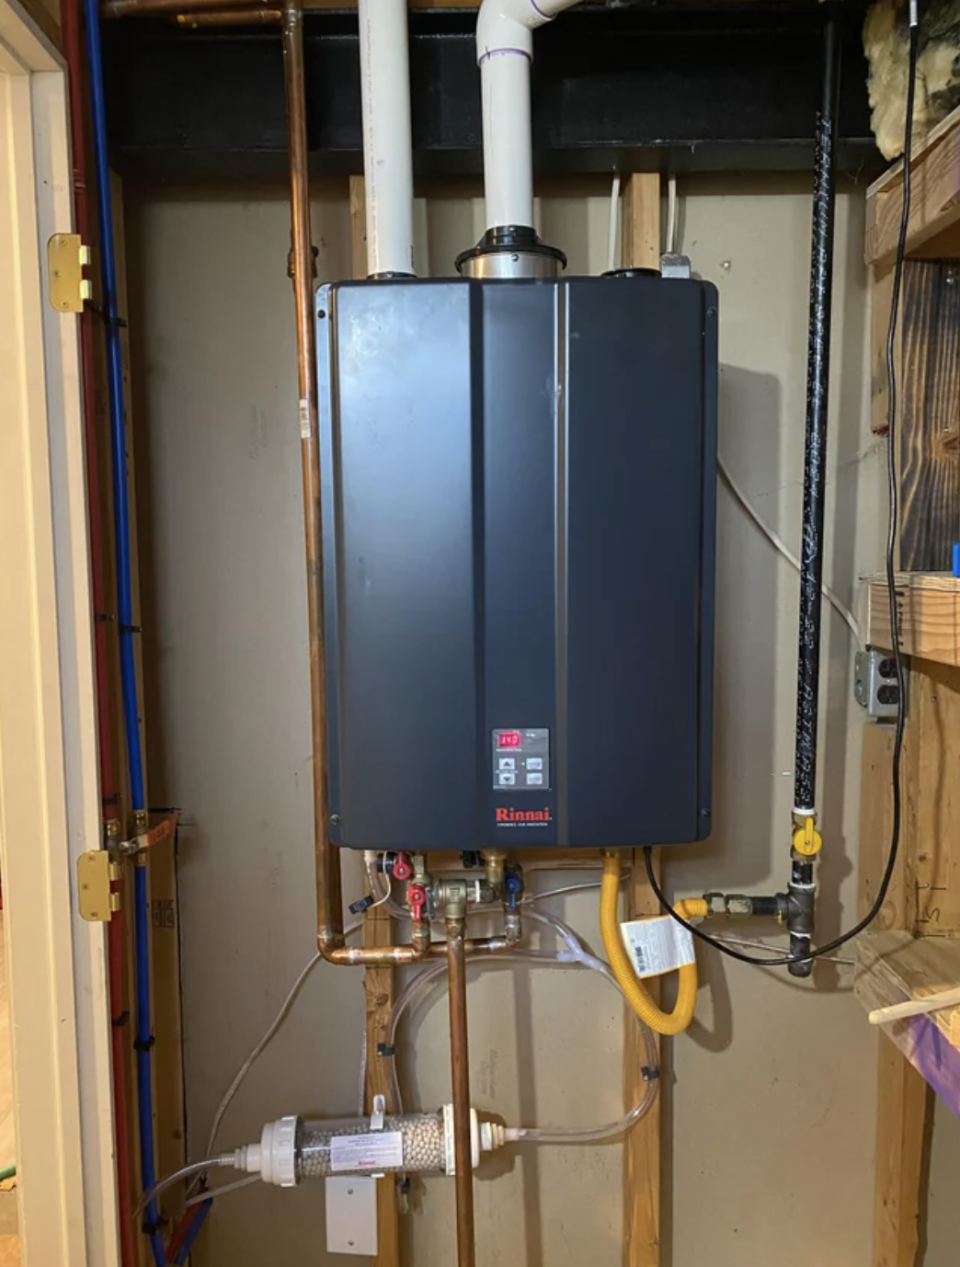 Installed tankless water heater in a home utility area